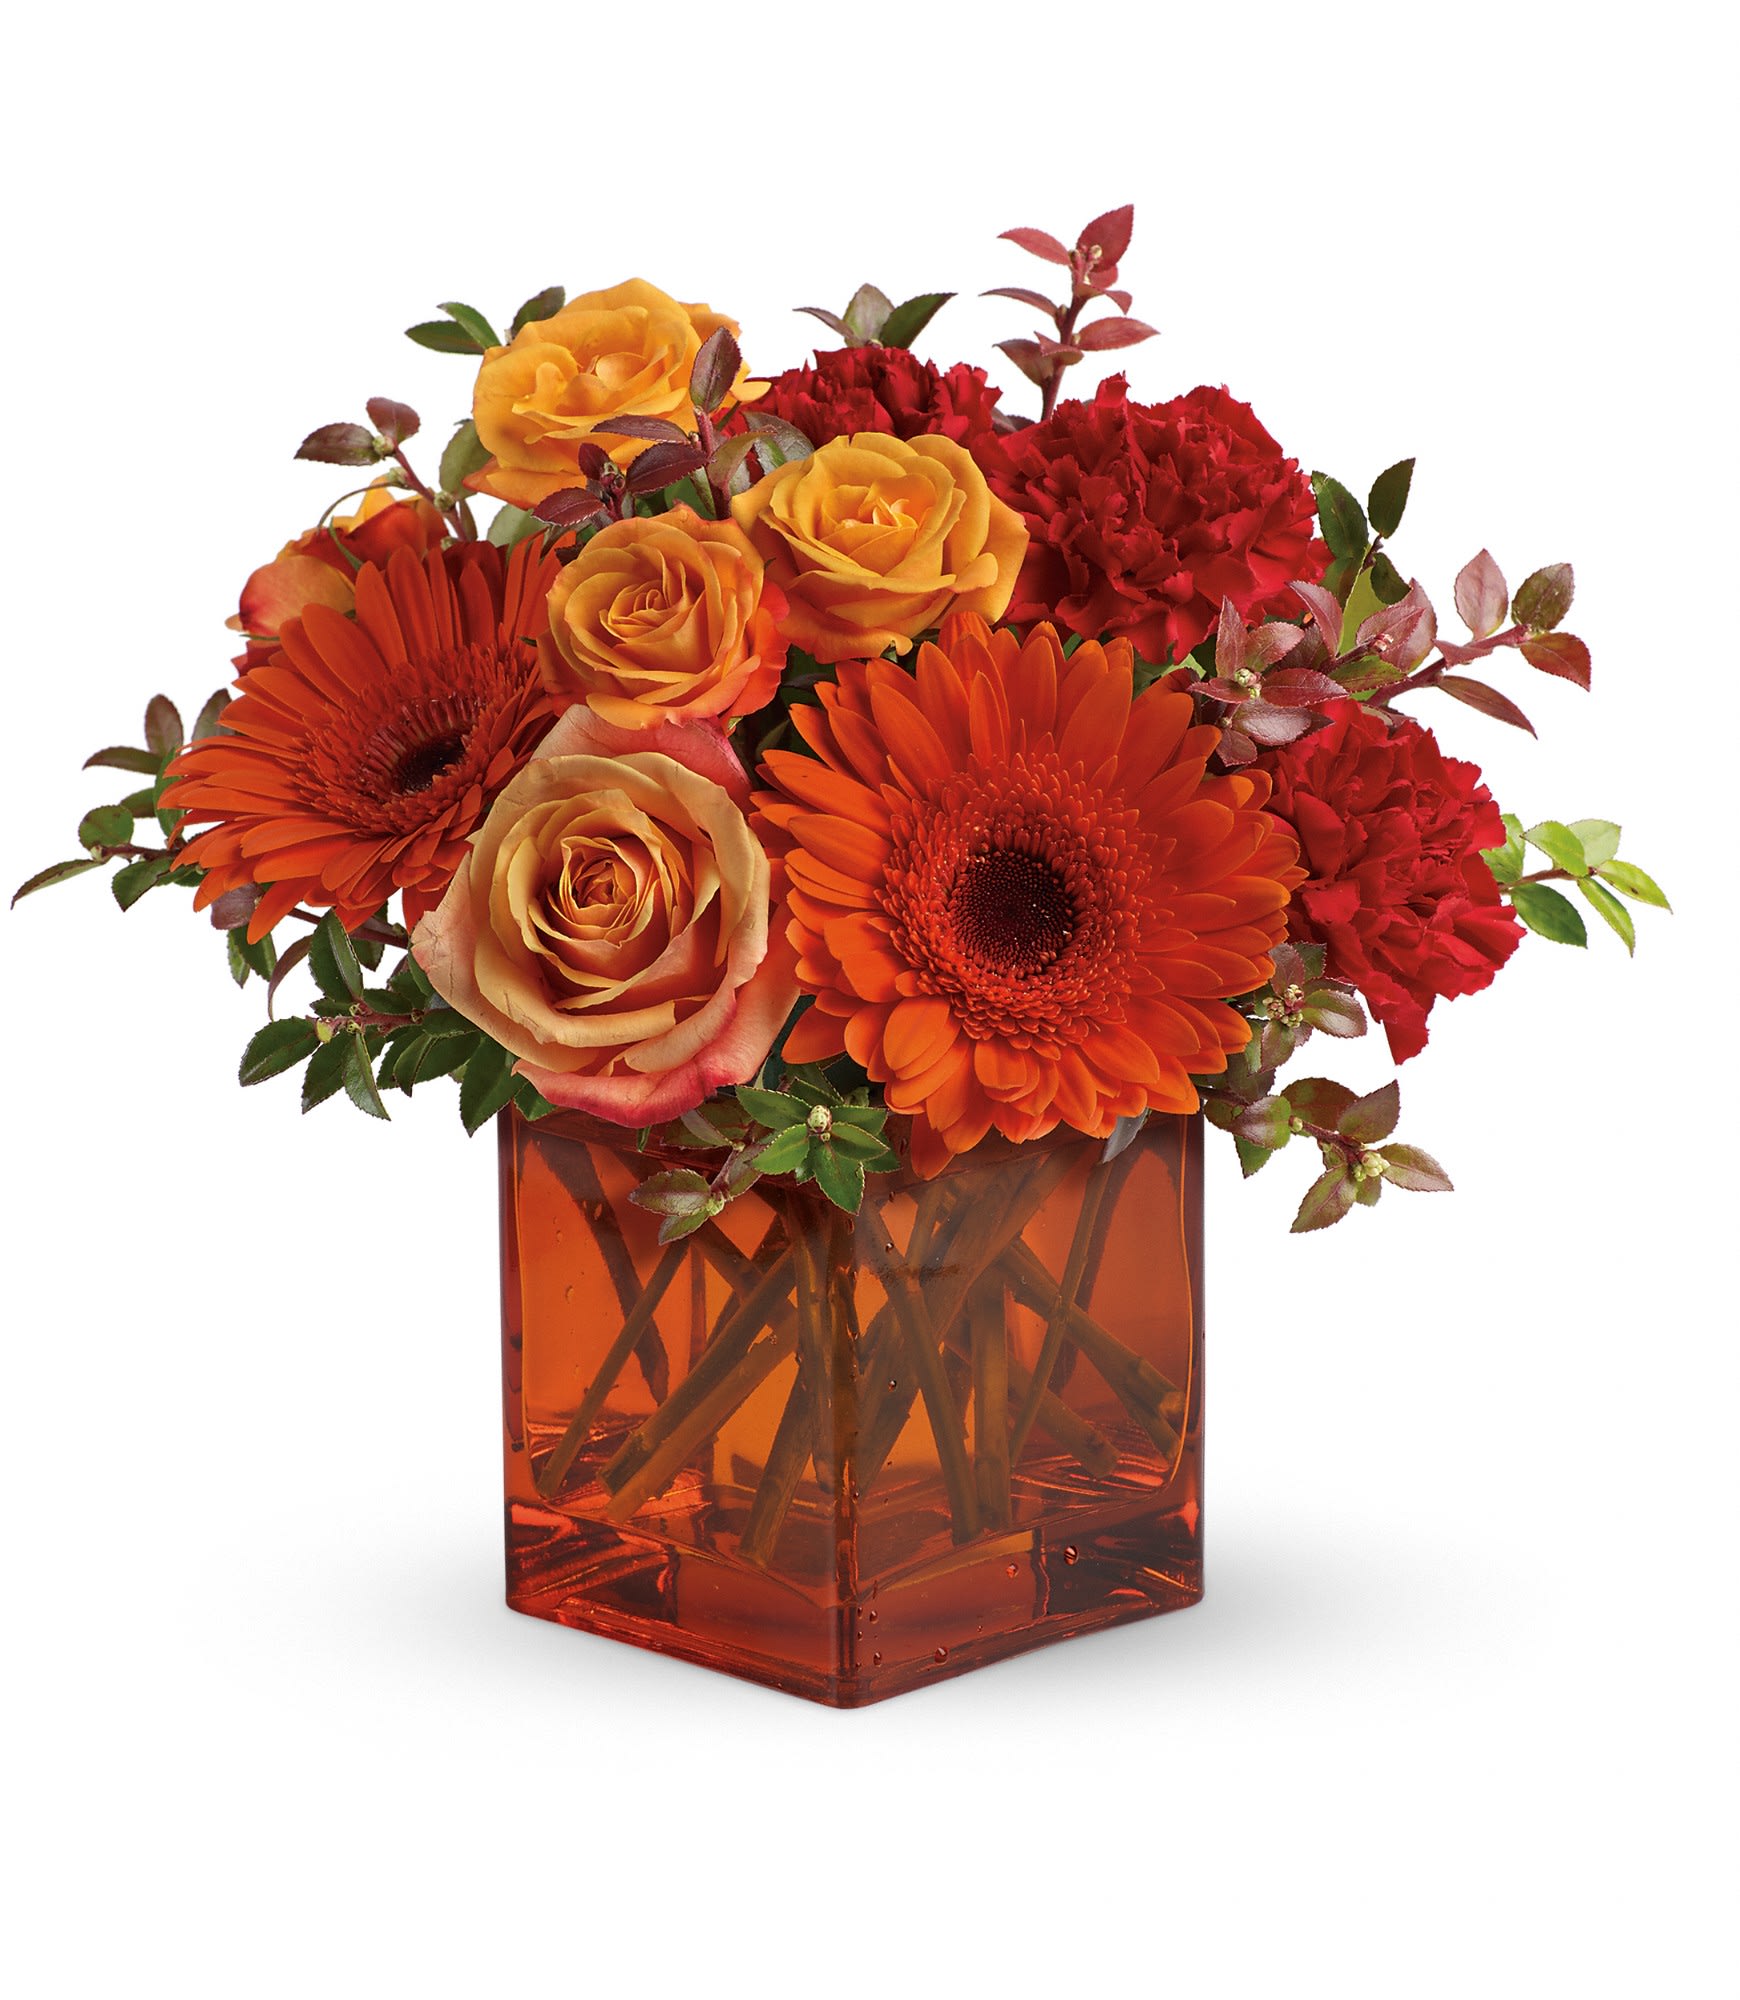 Sunrise Sunset - Sunrise, sunset, swiftly fly the days. So don't let another day go by without letting someone you know that you are thinking of them. This delightful arrangement will brighten anyone's morning, noon and night.  Fiery orange roses, spray roses and gerberas plus red carnations and huckleberry, are arranged in an exclusive orange cube vase. This arrangement is bound to get glowing reviews and thank-yous!  Approximately 8&quot; W x 9&quot; H  Orientation: One-Sided  As Shown : T47-1A Deluxe : T47-1B Premium : T47-1C